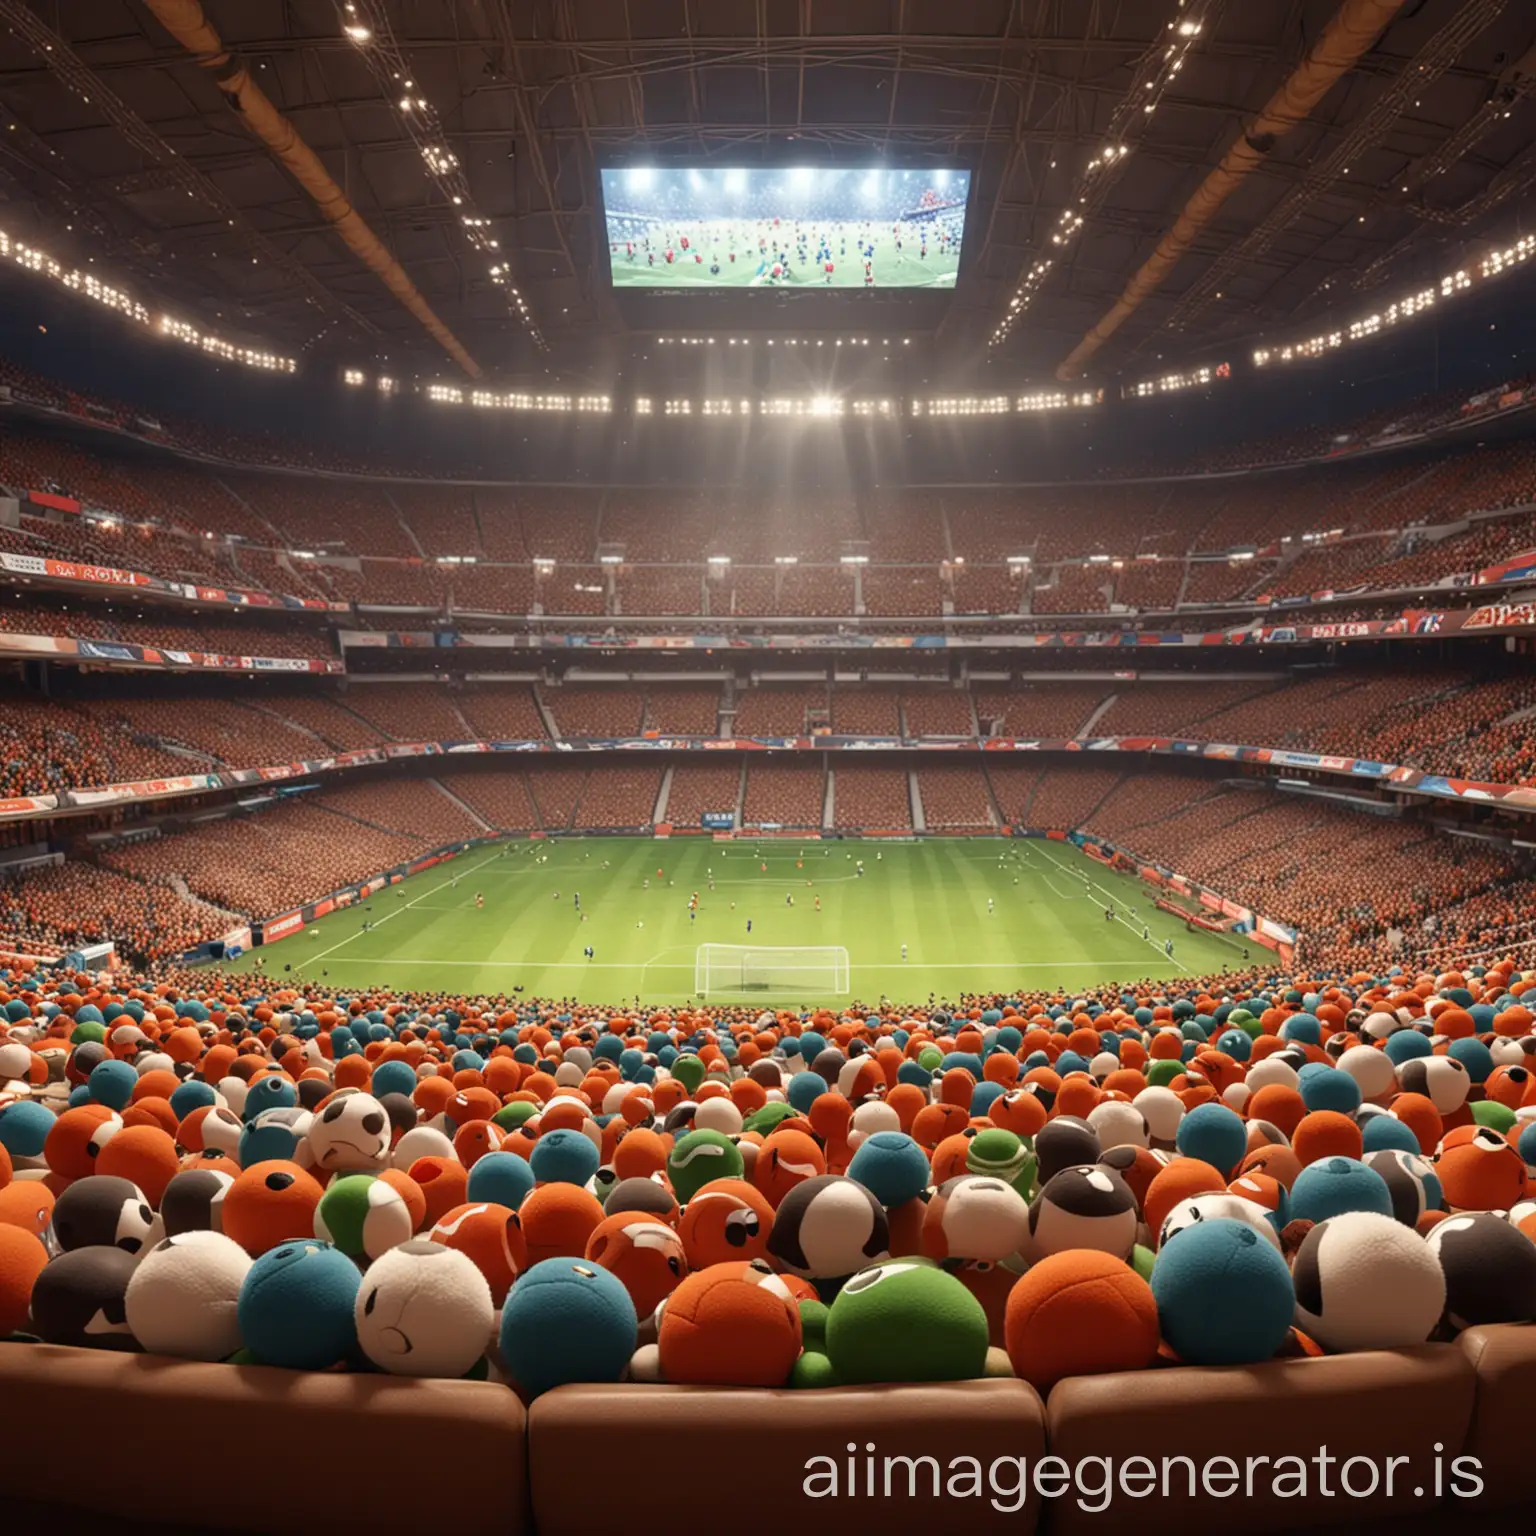 A group of cute plush balls sitting in the audience, watching a football match, the stadium in the center of the screen, exciting atmosphere, bird's eye view, ultra-wide angle, super high definition, c4d, OC renderer, Pixar